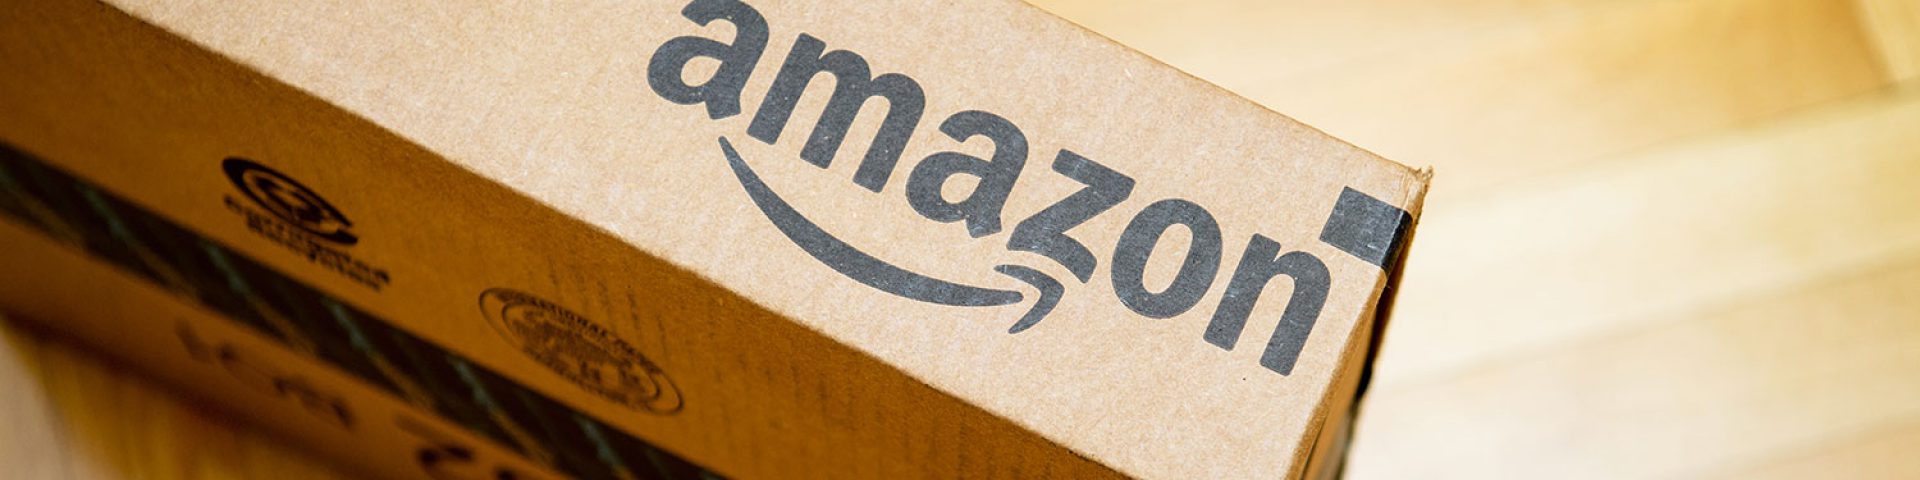 Sell and export on Amazon